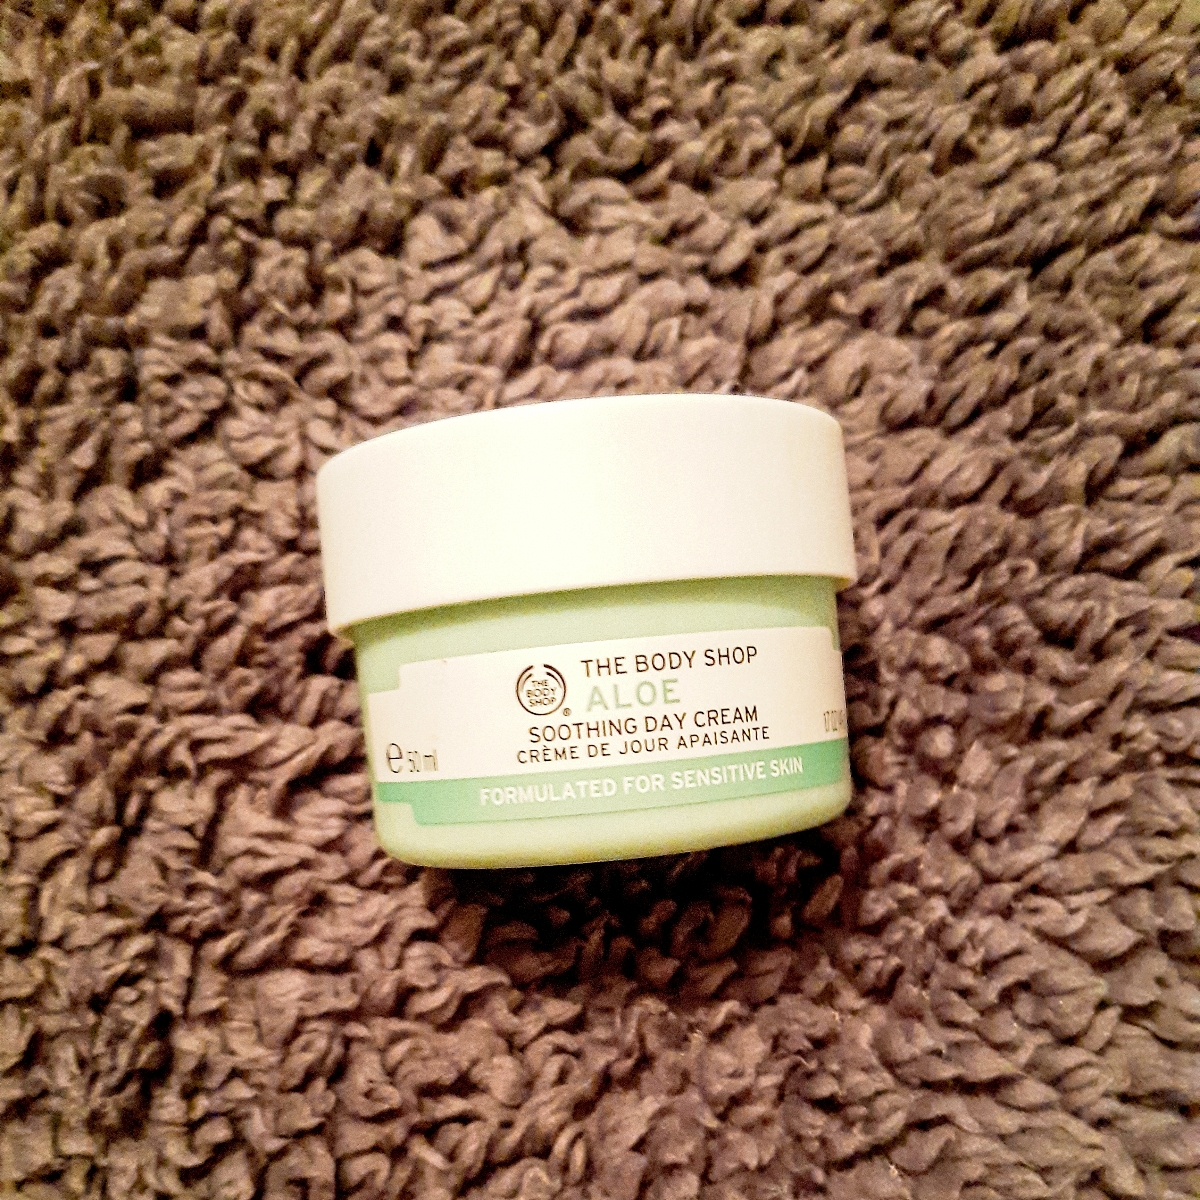 The Body Shop Aloe Soothing Day Cream Reviews | abillion